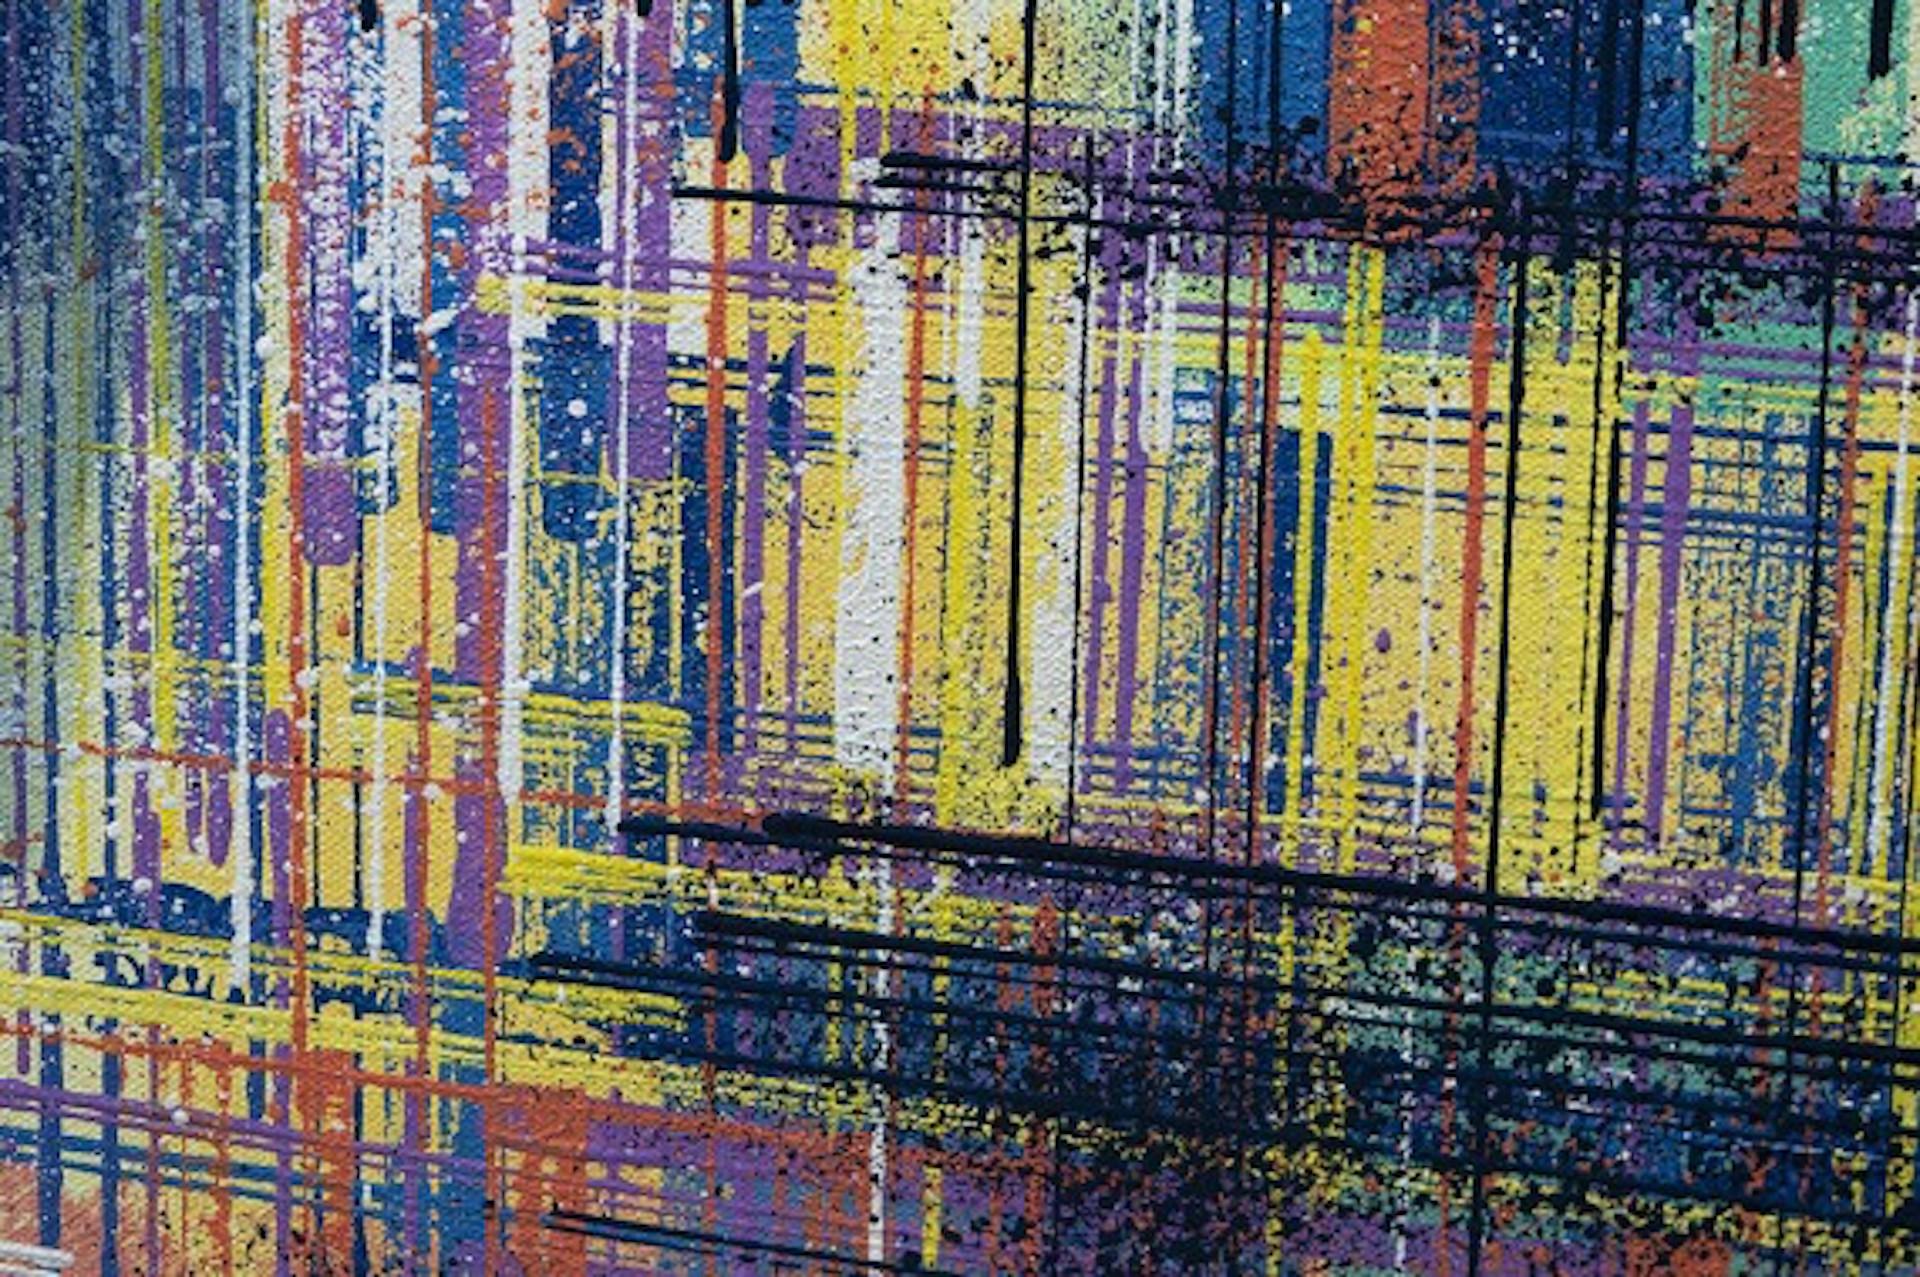 Marc Todd
New York – Times Square At Midnight
Original Painting on Canvas
Medium – Acrylic Paint on Canvas
Sold Unframed
Image size: H 76cm x W 102cm x D 1.9cm
Please note that in situ images are purely an indication of how a piece may look.

New